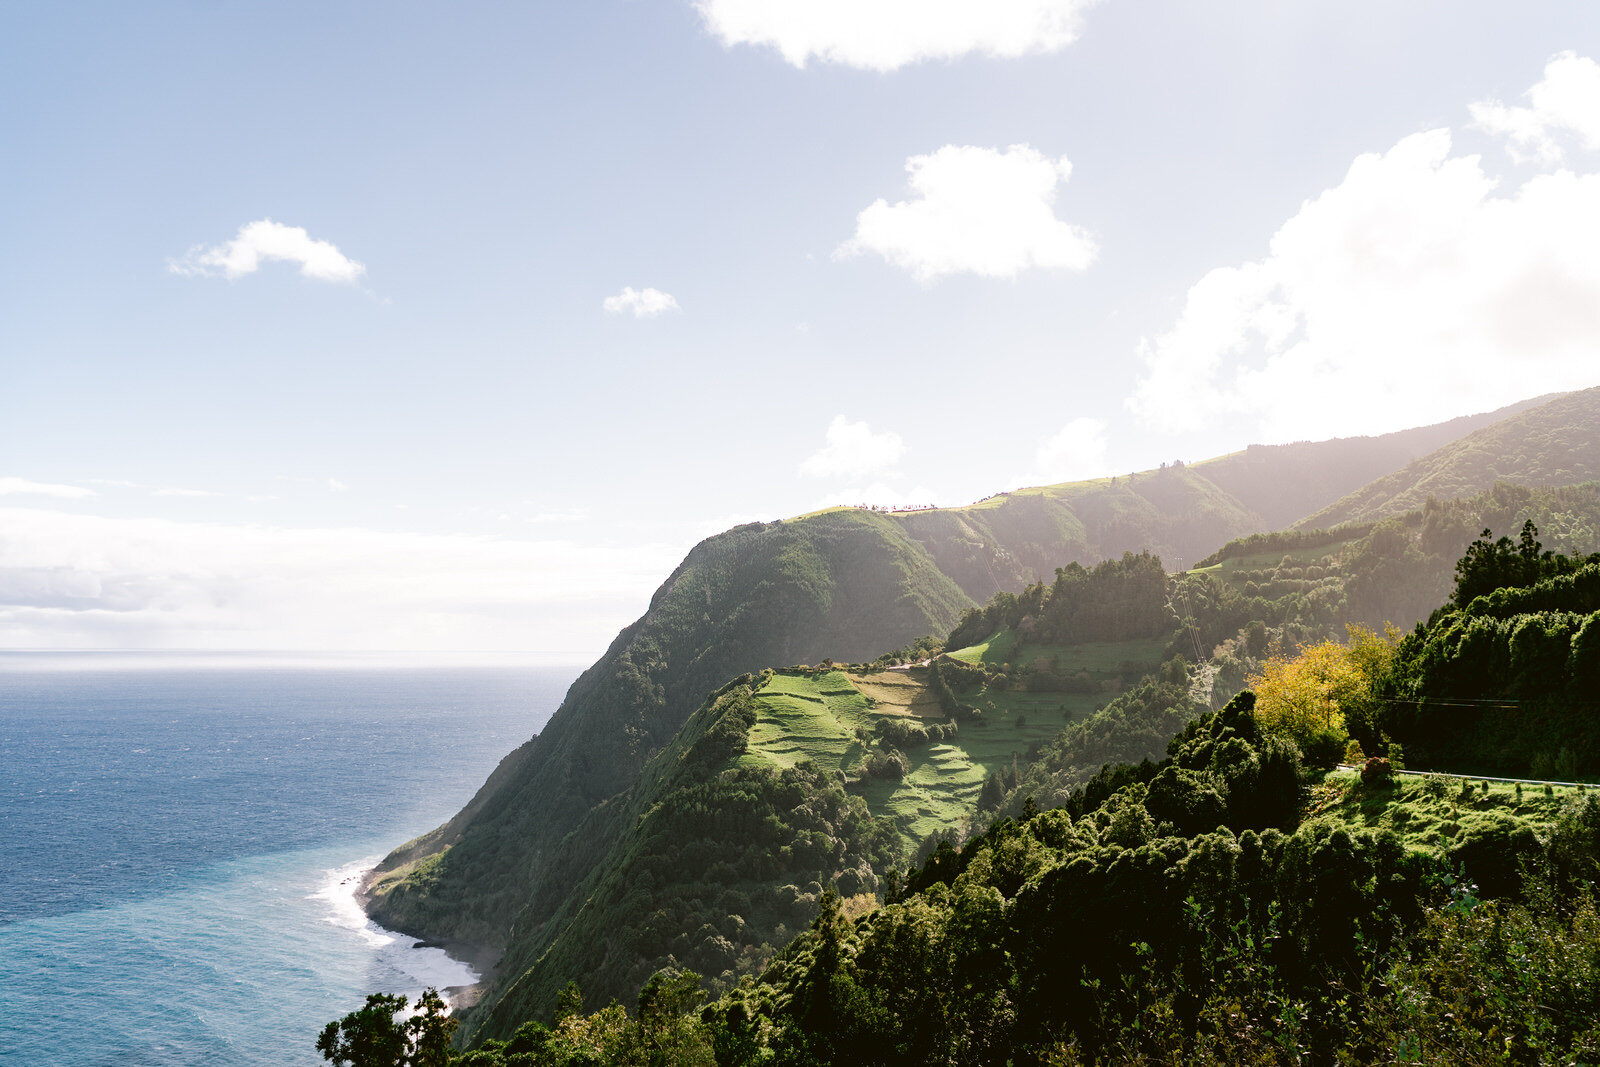 Elopement in the Azores. Cpuple getting married in Portugal. Elopement photography in Europe. Epic locations to elope in the world. Sao Miquel island Azores wedding (65).jpg